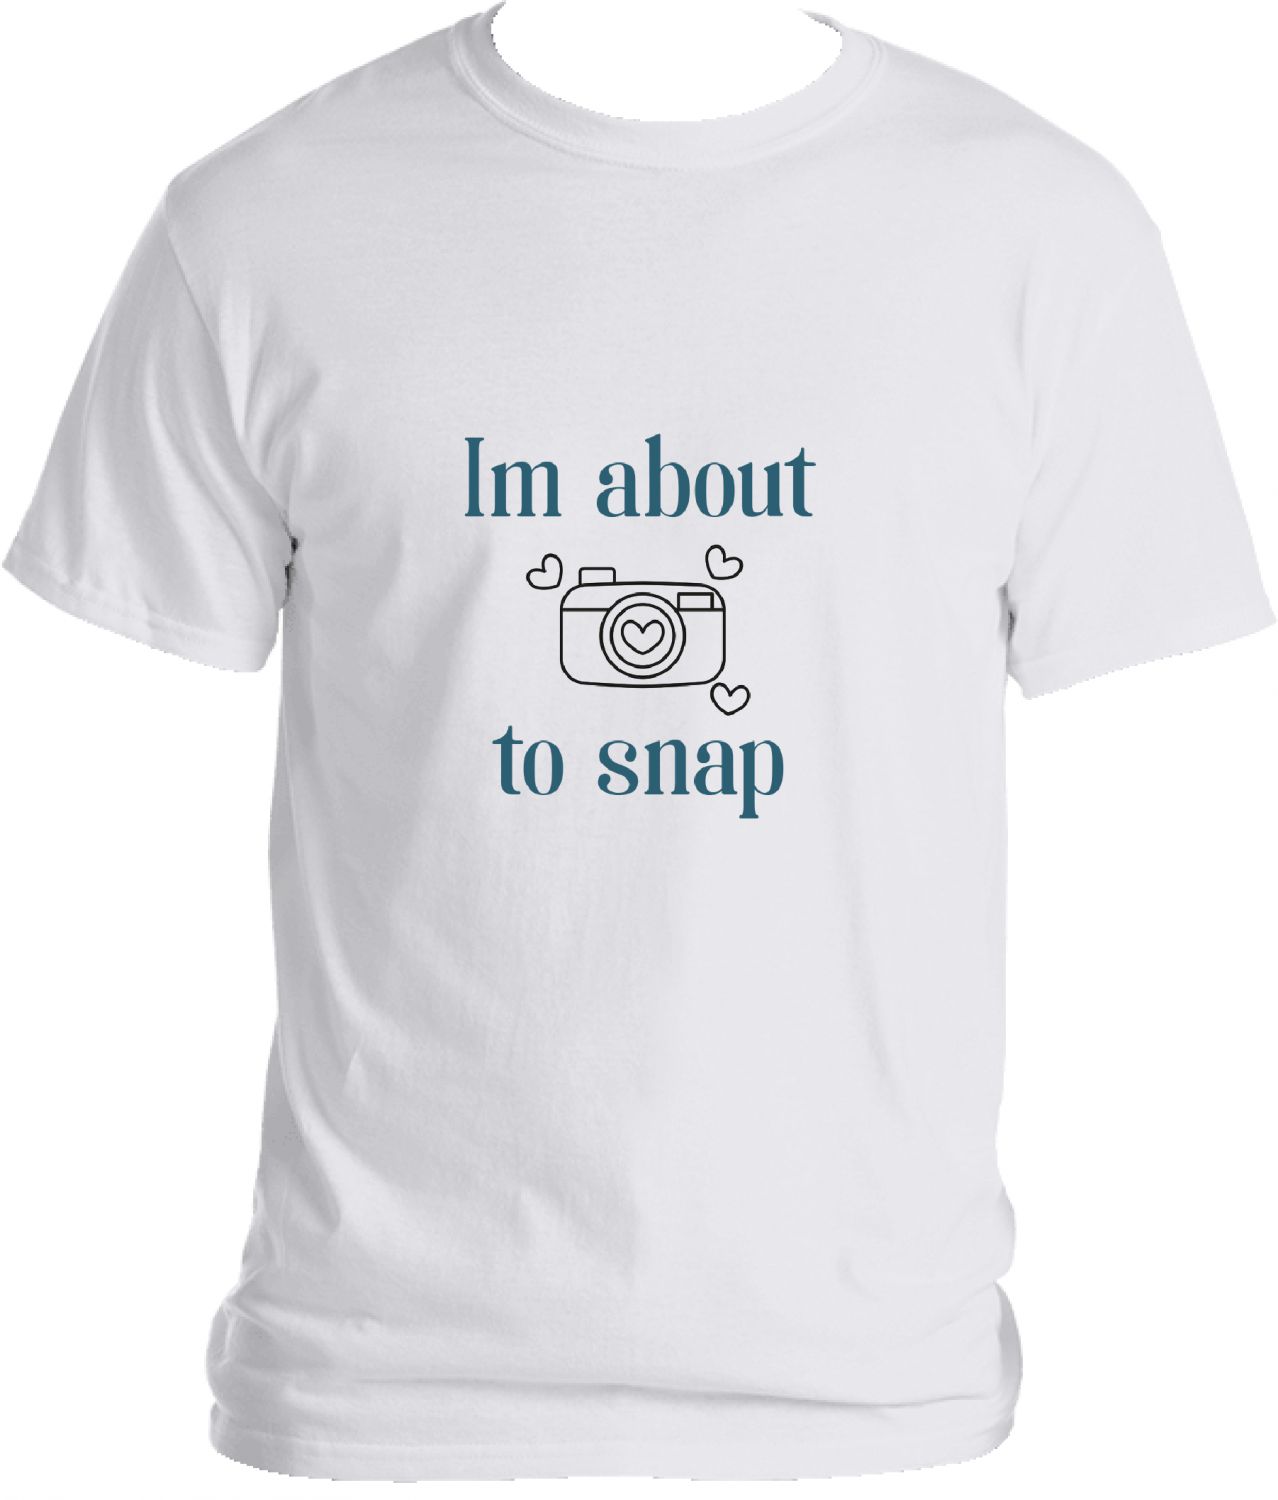 About to Snap tshirt